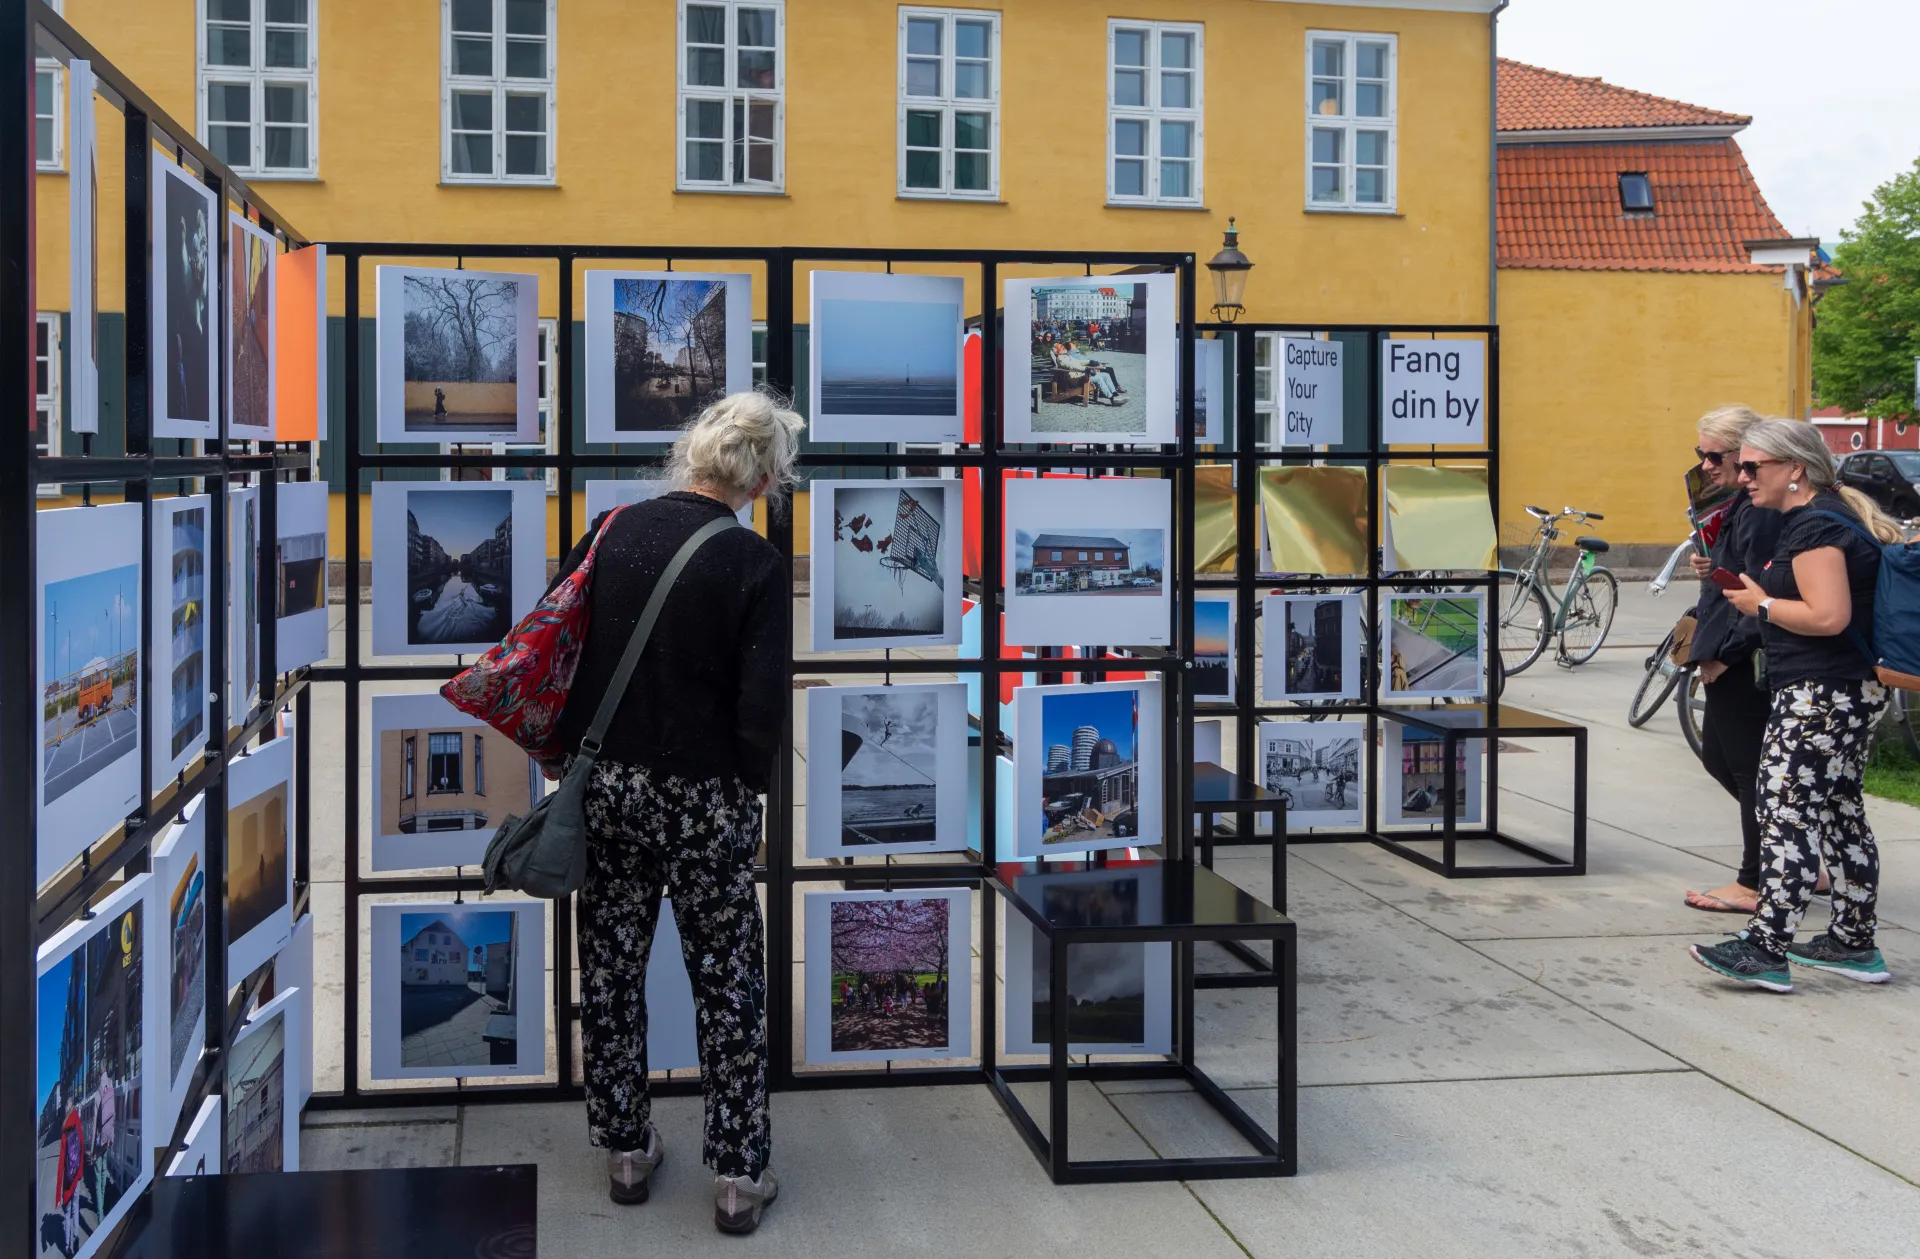 This Week in Copenhagen: All about the pictures!